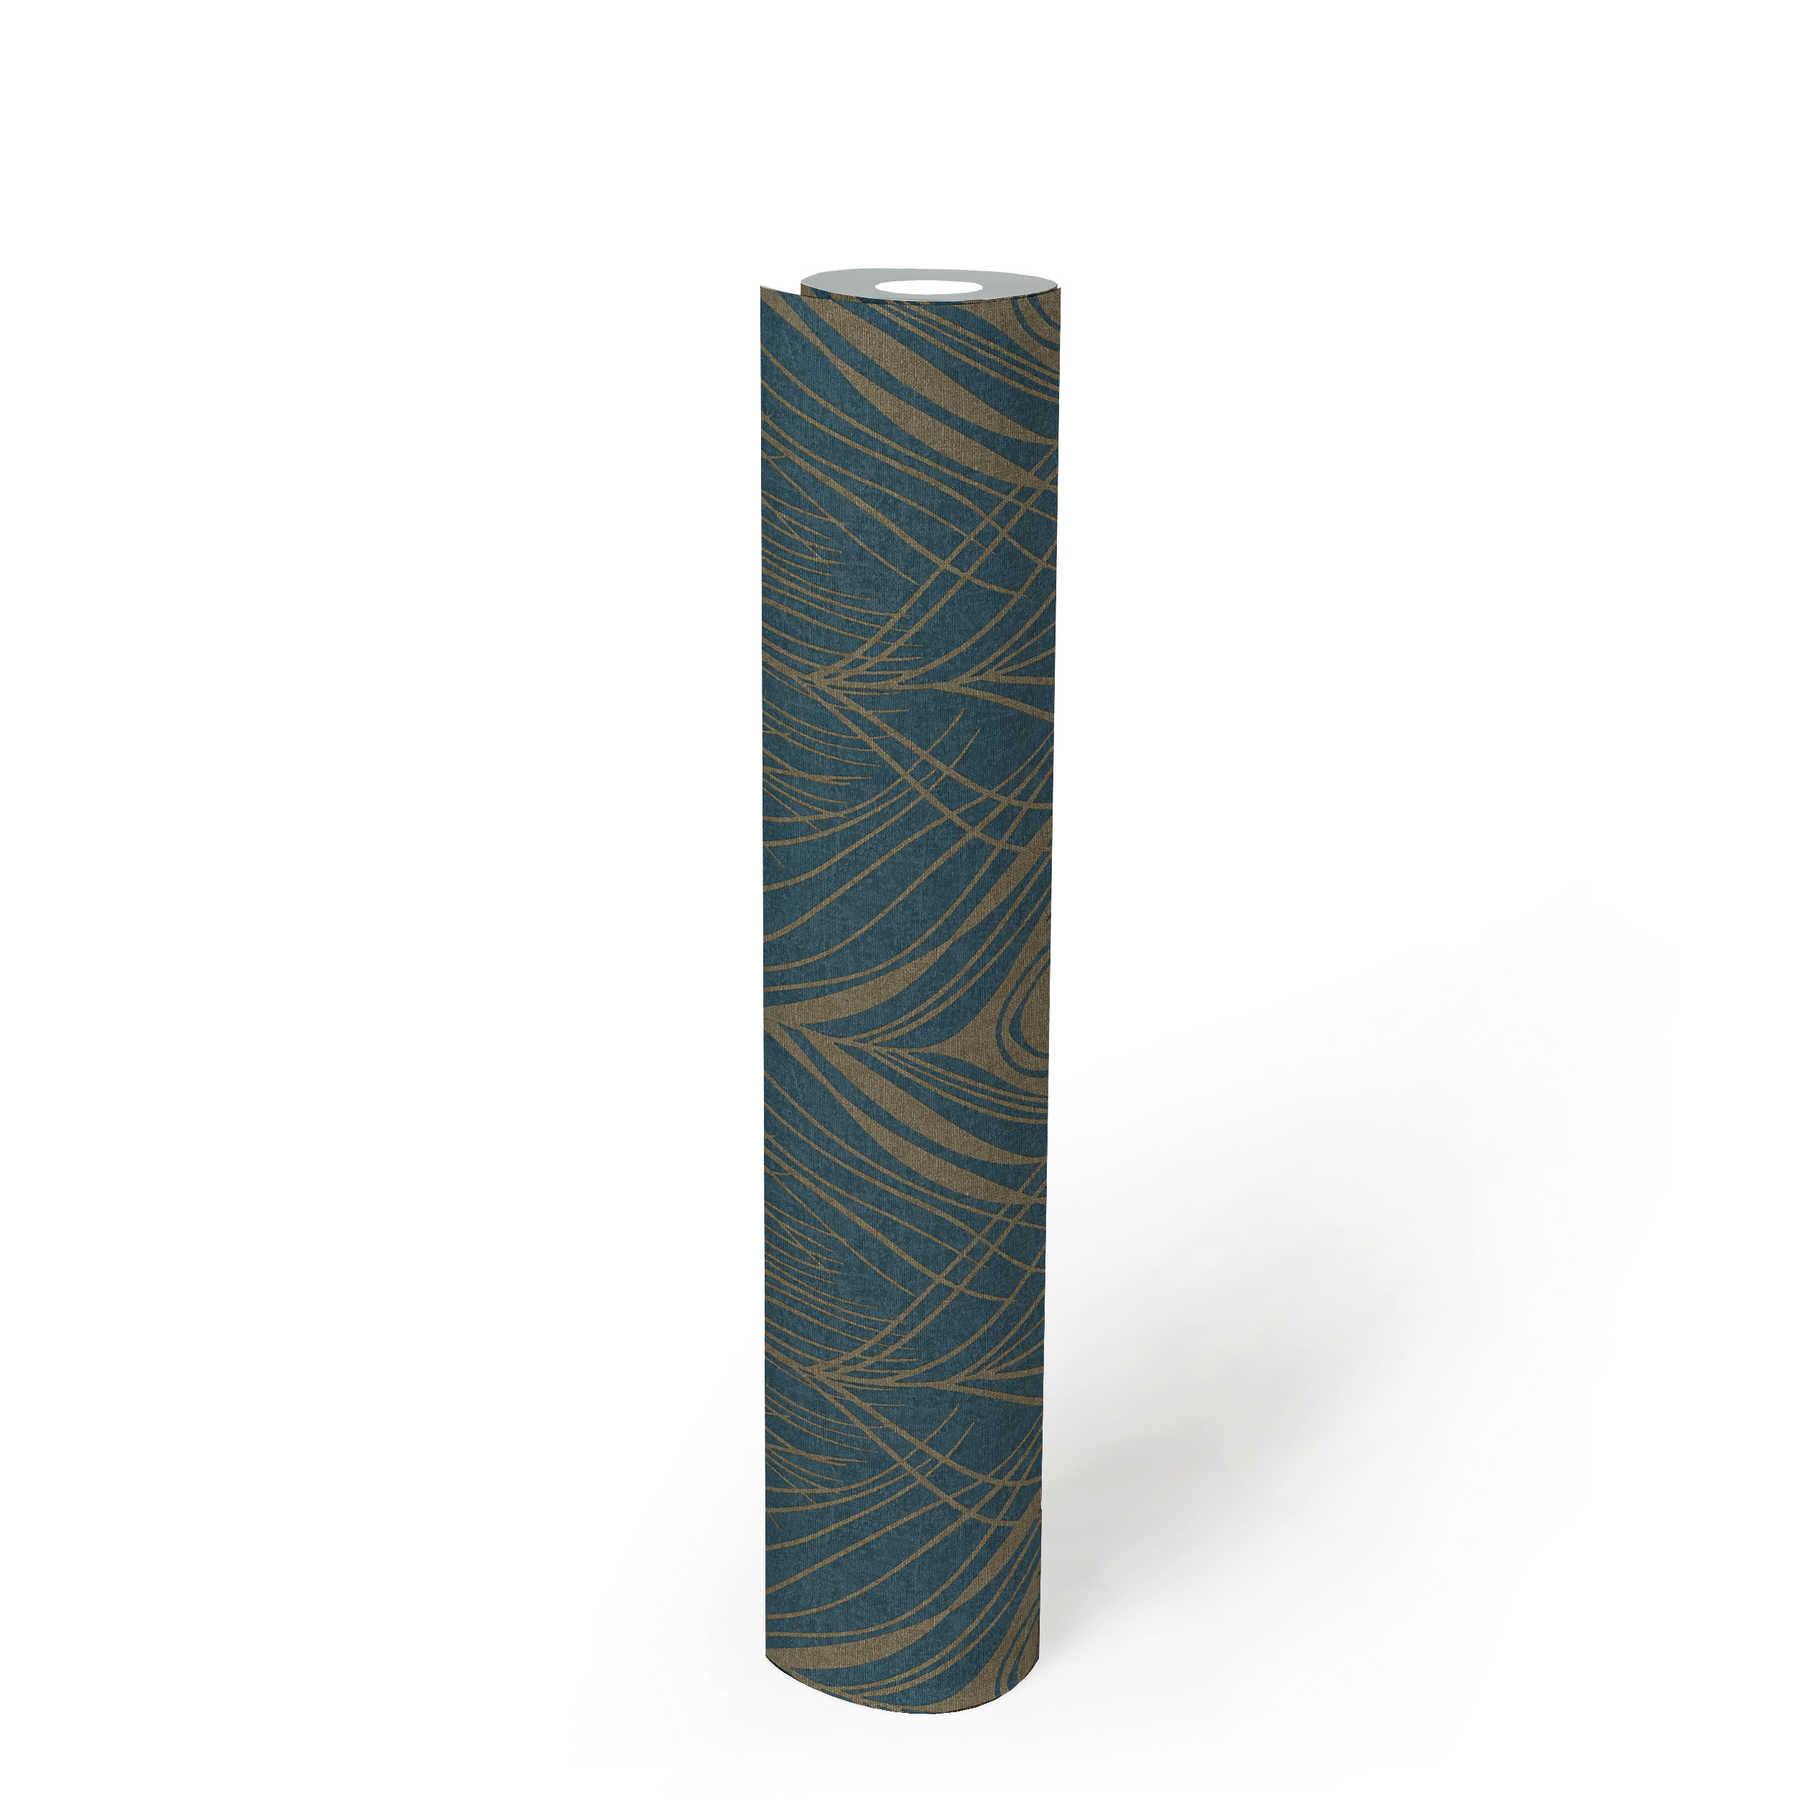             Non-woven wallpaper with peacock feathers, metallic look - blue, gold, yellow
        